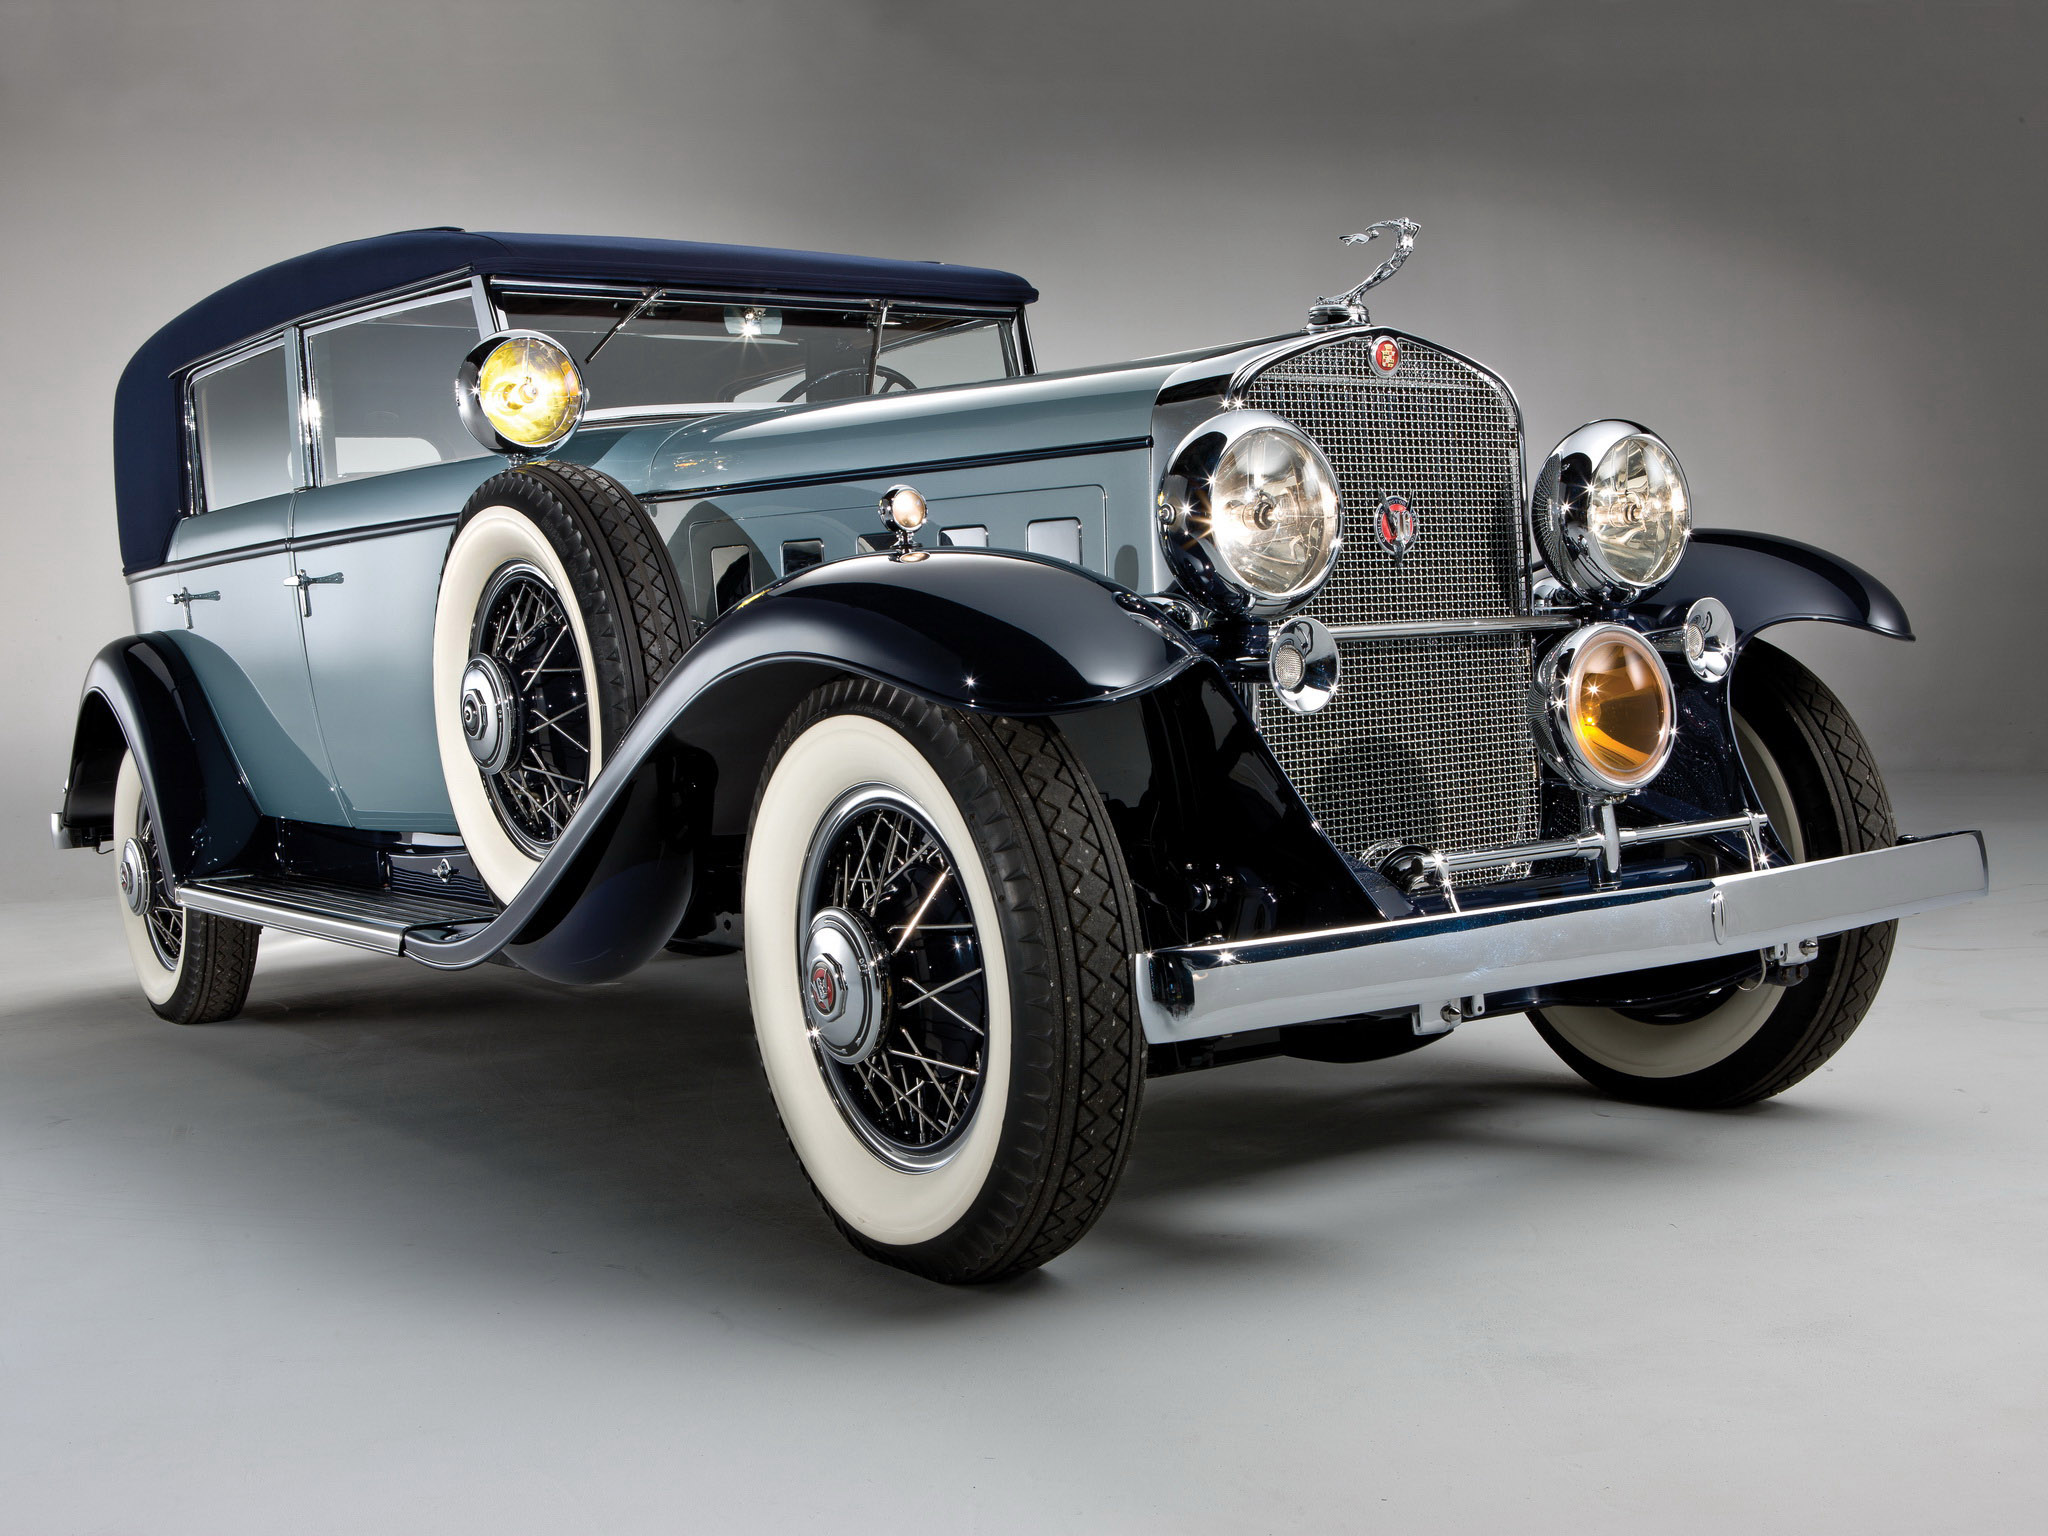 Amazing 1930 Cadillac V16 Imperial Sedan Pictures & Backgrounds